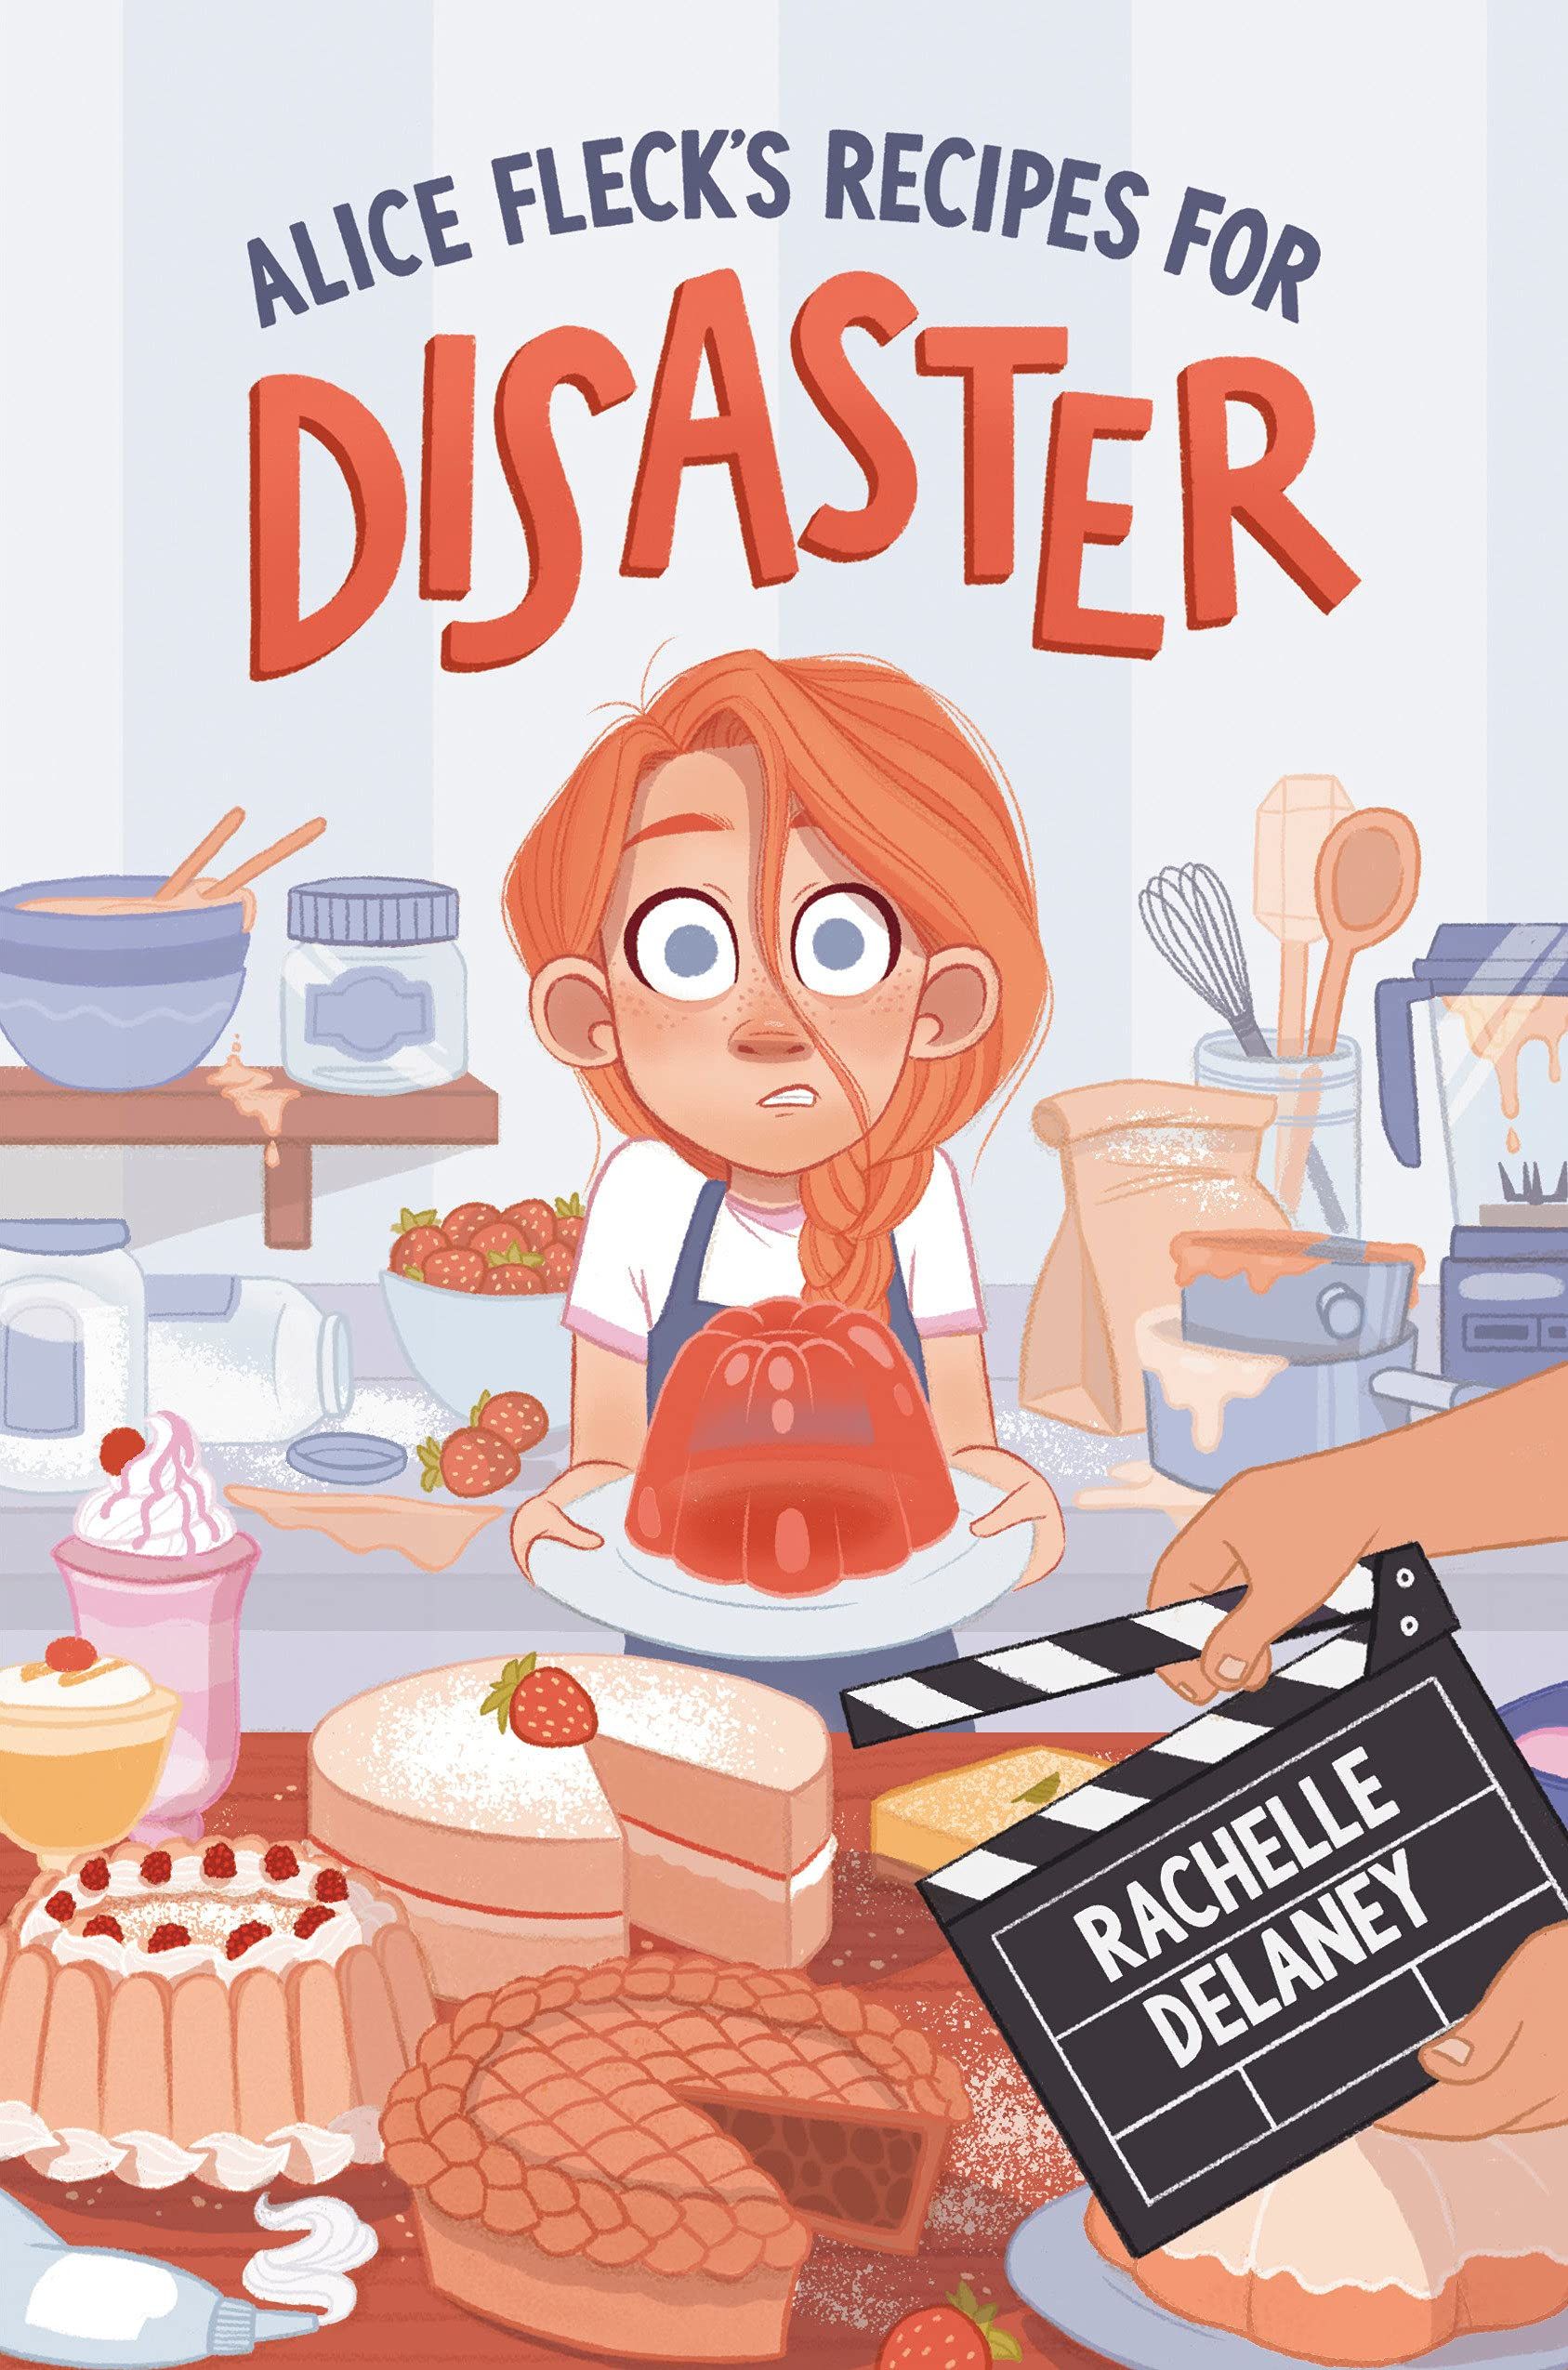 Book cover of Alice Fleck's Recipes for Disaster by Rachelle Delaney